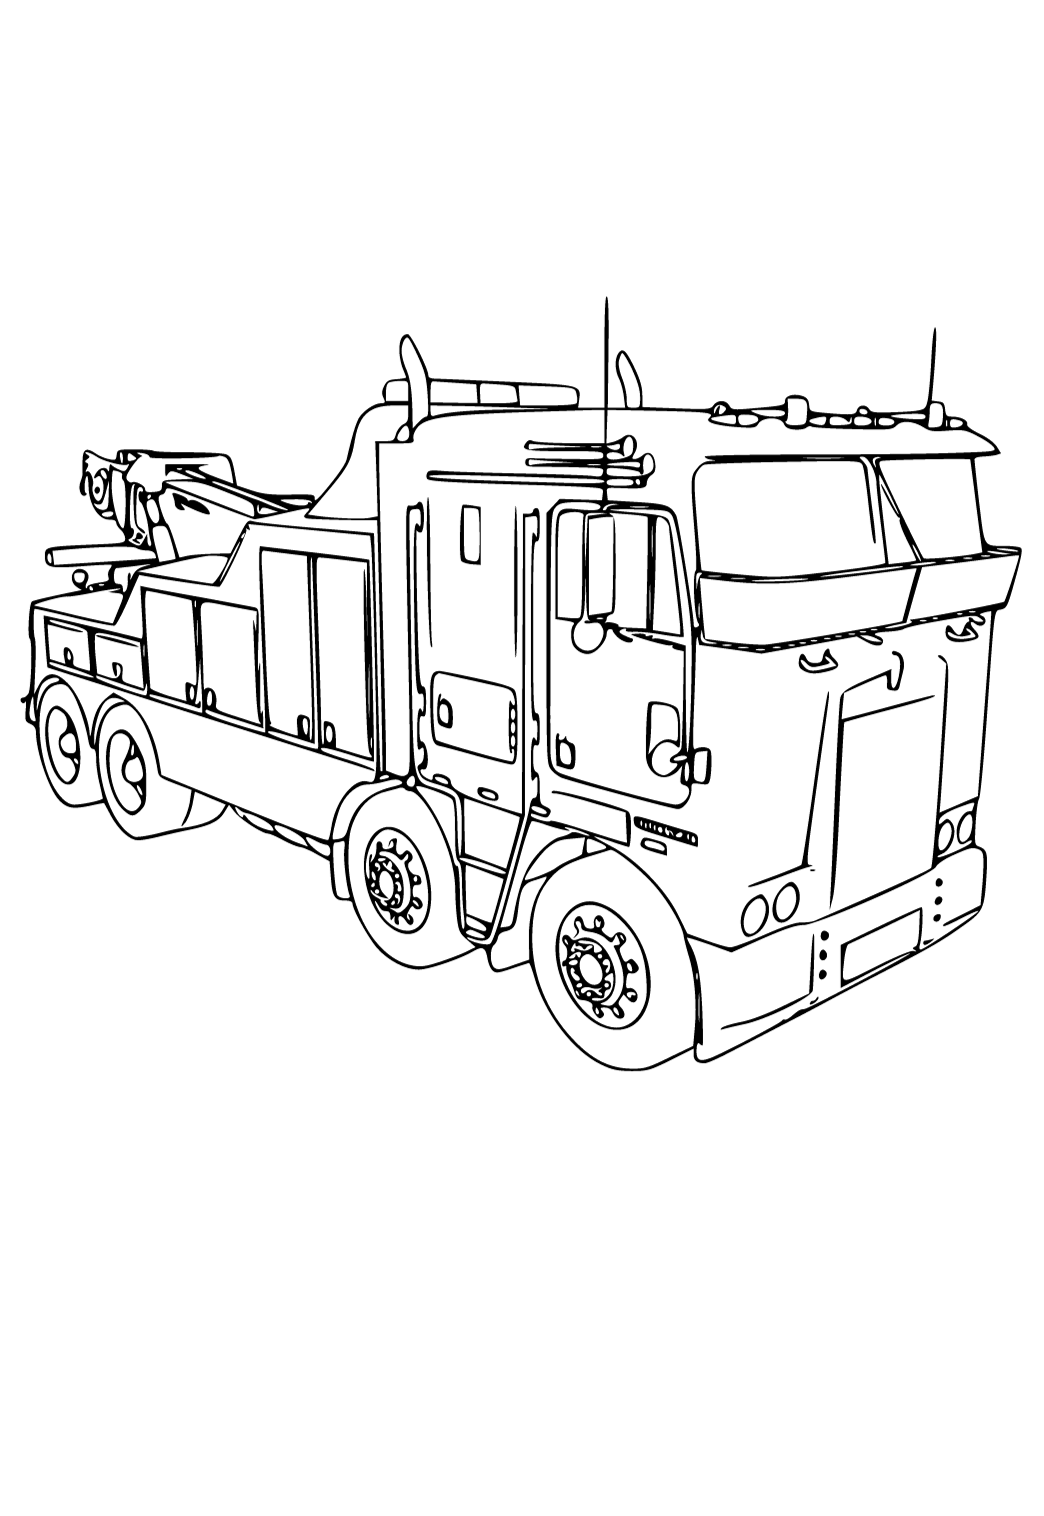 Free printable semi truck power coloring page for adults and kids